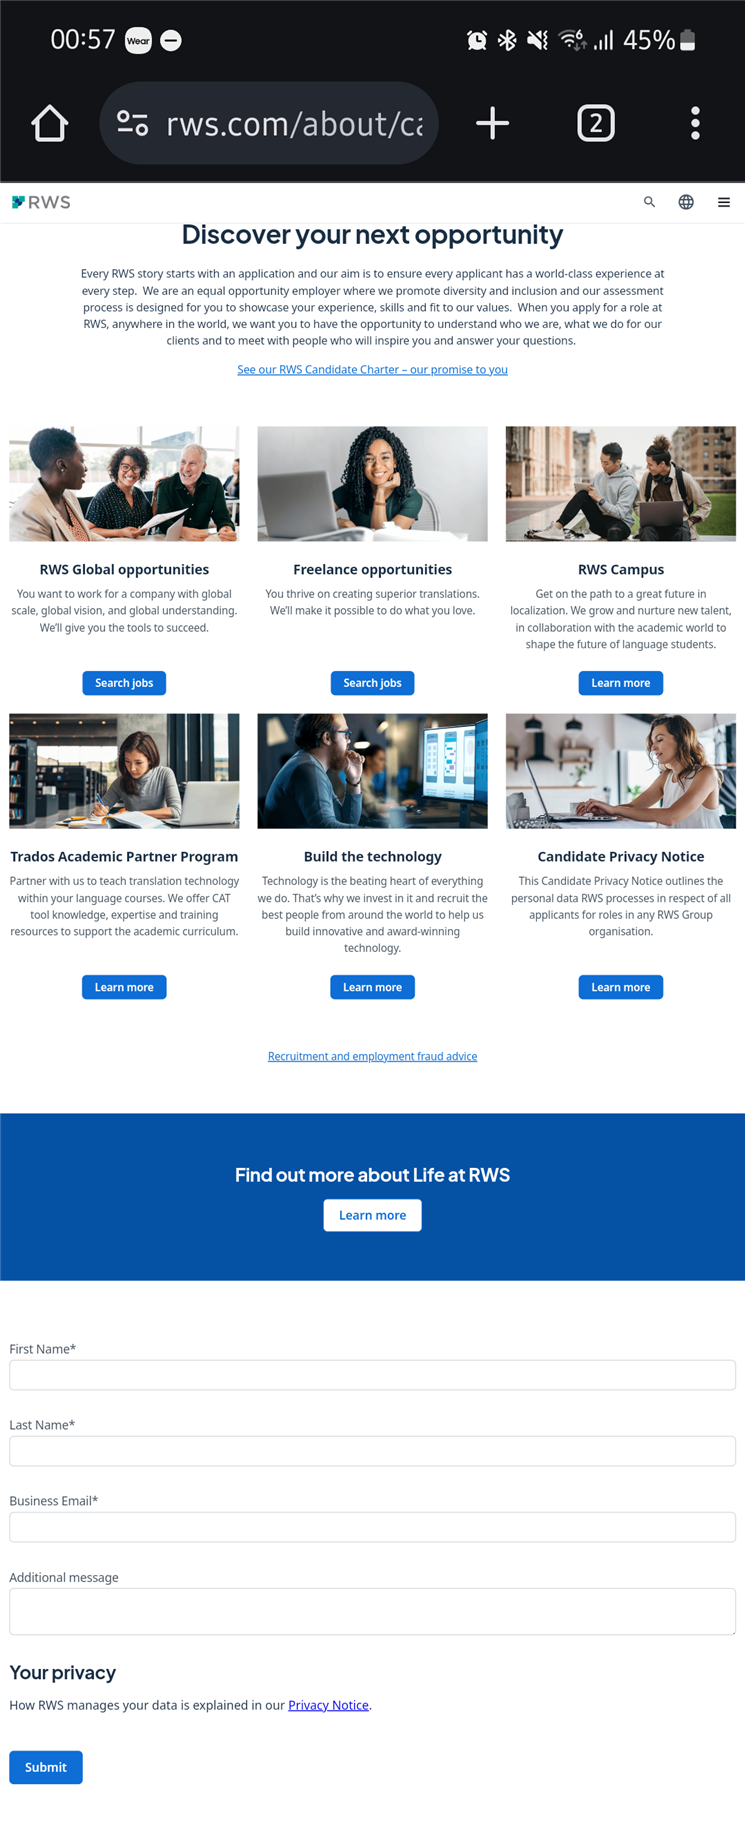 Screenshot of RWS careers page with sections for Discover your next opportunity, RWS Global opportunities, Freelance opportunities, RWS Campus, Trados Academic Partner Program, Build the technology, and Candidate Privacy Notice. A contact form is at the bottom.